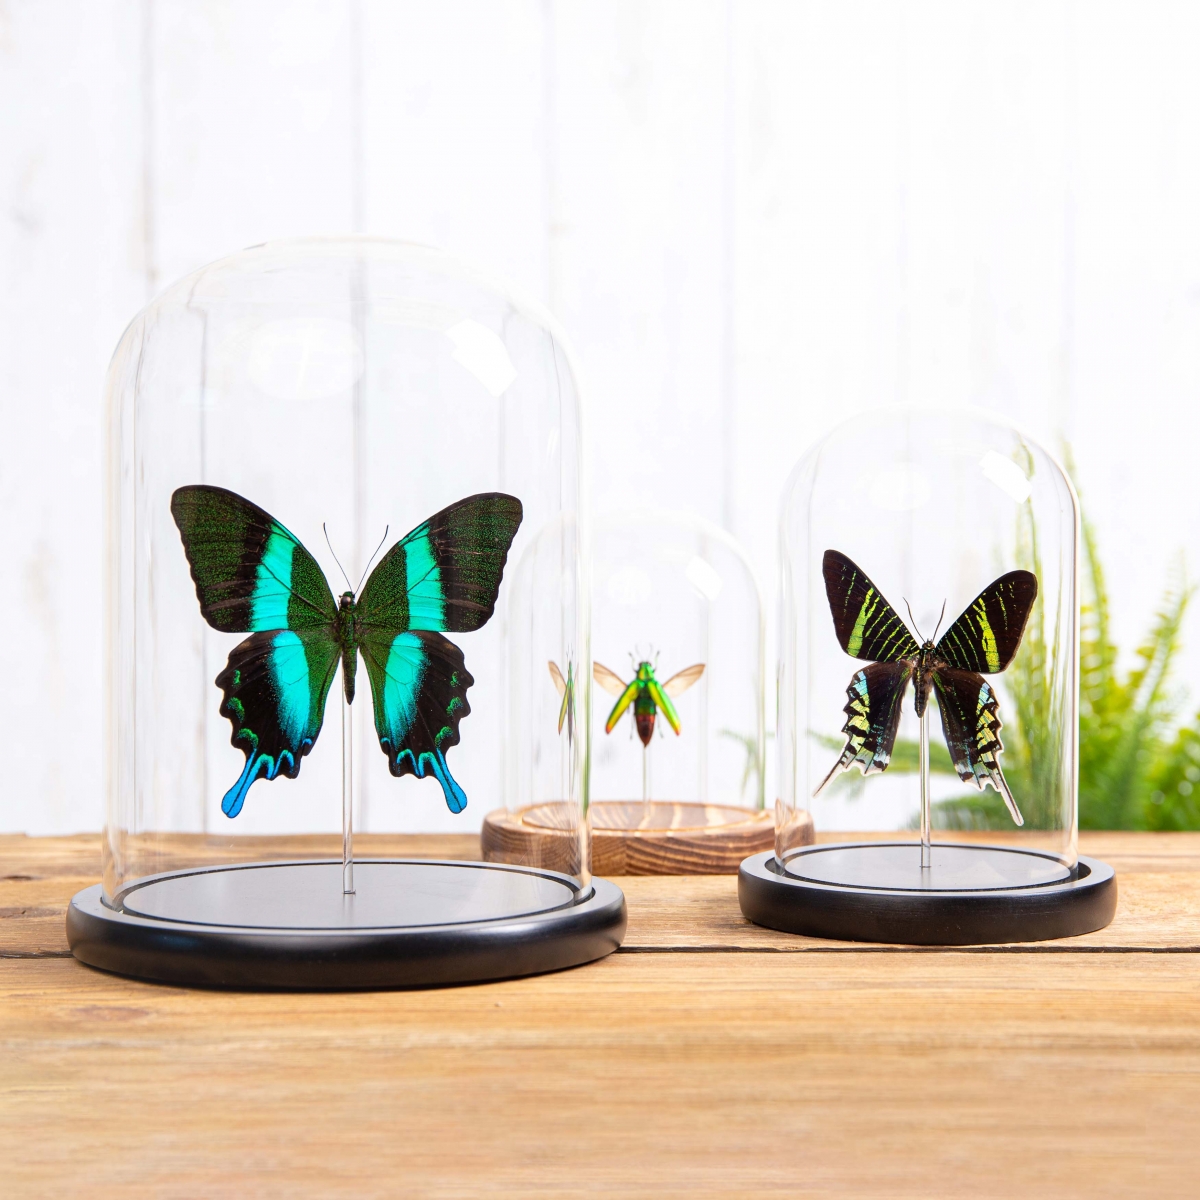 Shining Red Charaxes in Glass Dome with Wooden Base (Charaxes zingha)